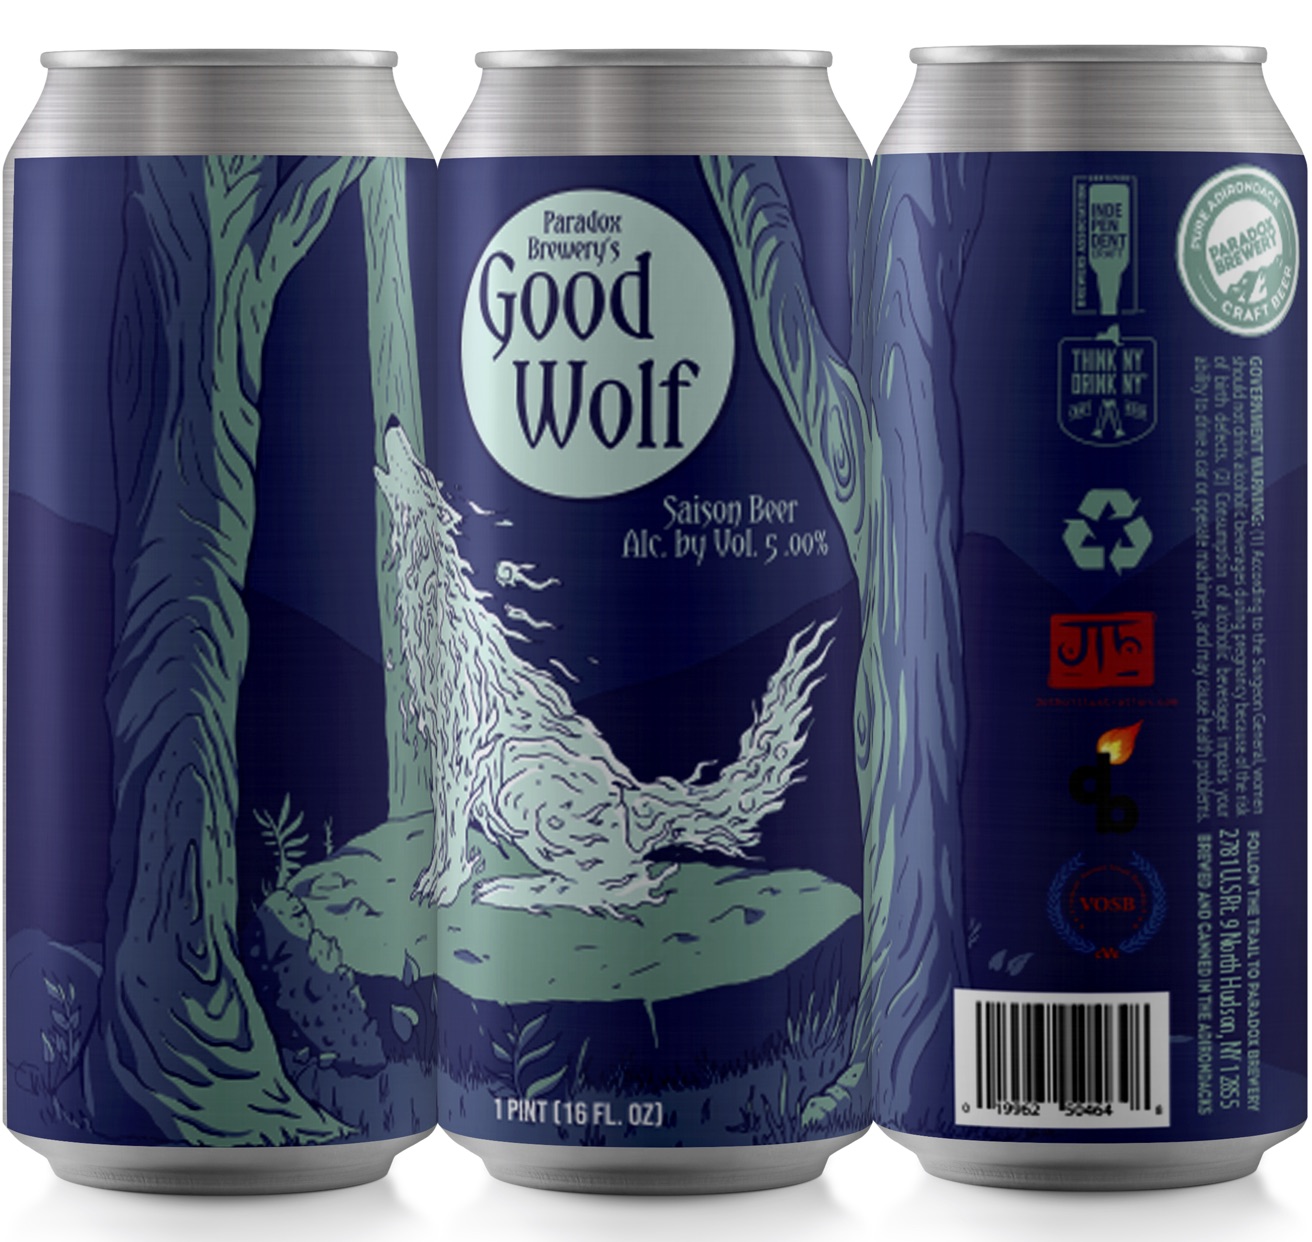 paradox brewery cans of good wolf beer